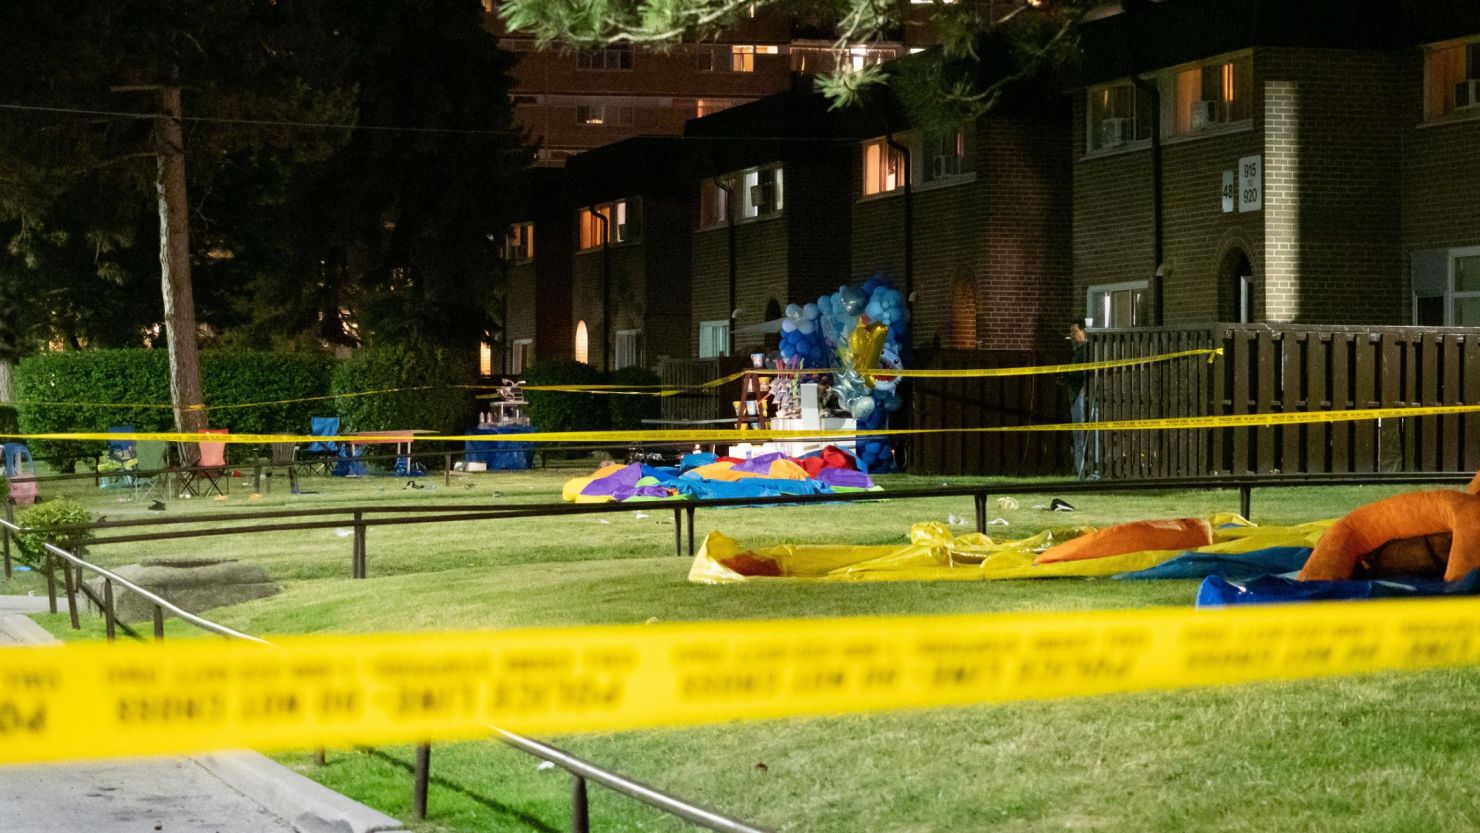 Four people, including three children, shot at a birthday party in Toronto, Canada on Saturday, police say.